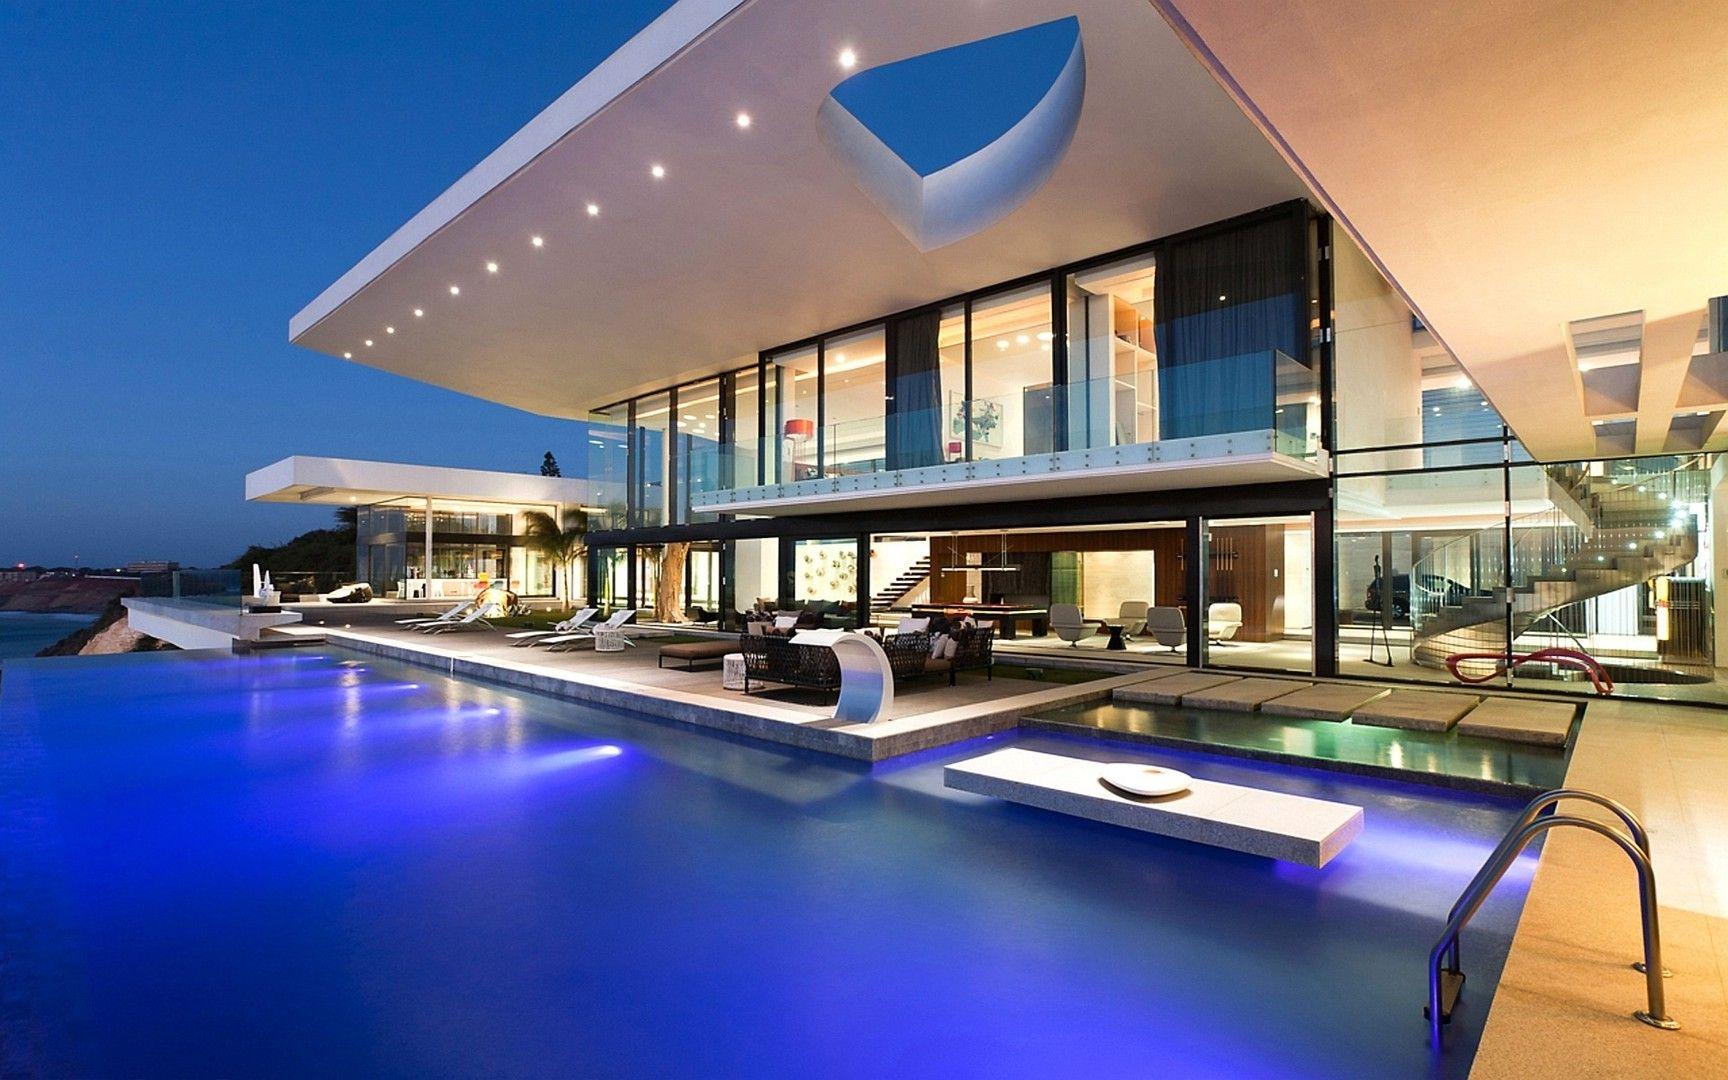 awesome Modern House With Pool, Pool. Architecture